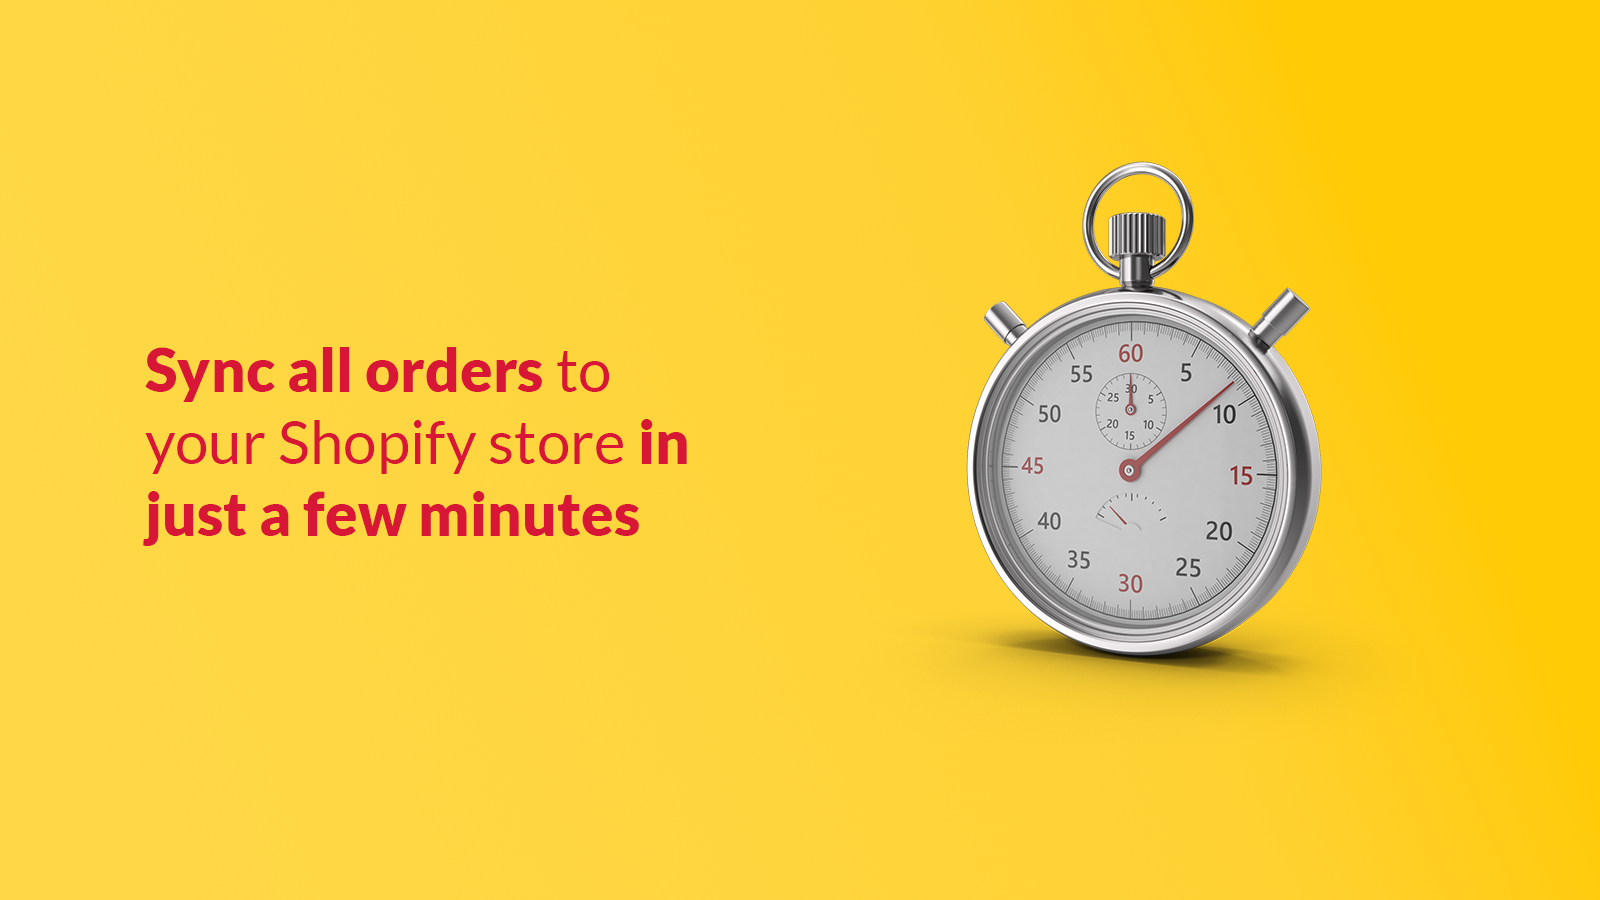 Sync all orders to your Shopify store in just a few minutes